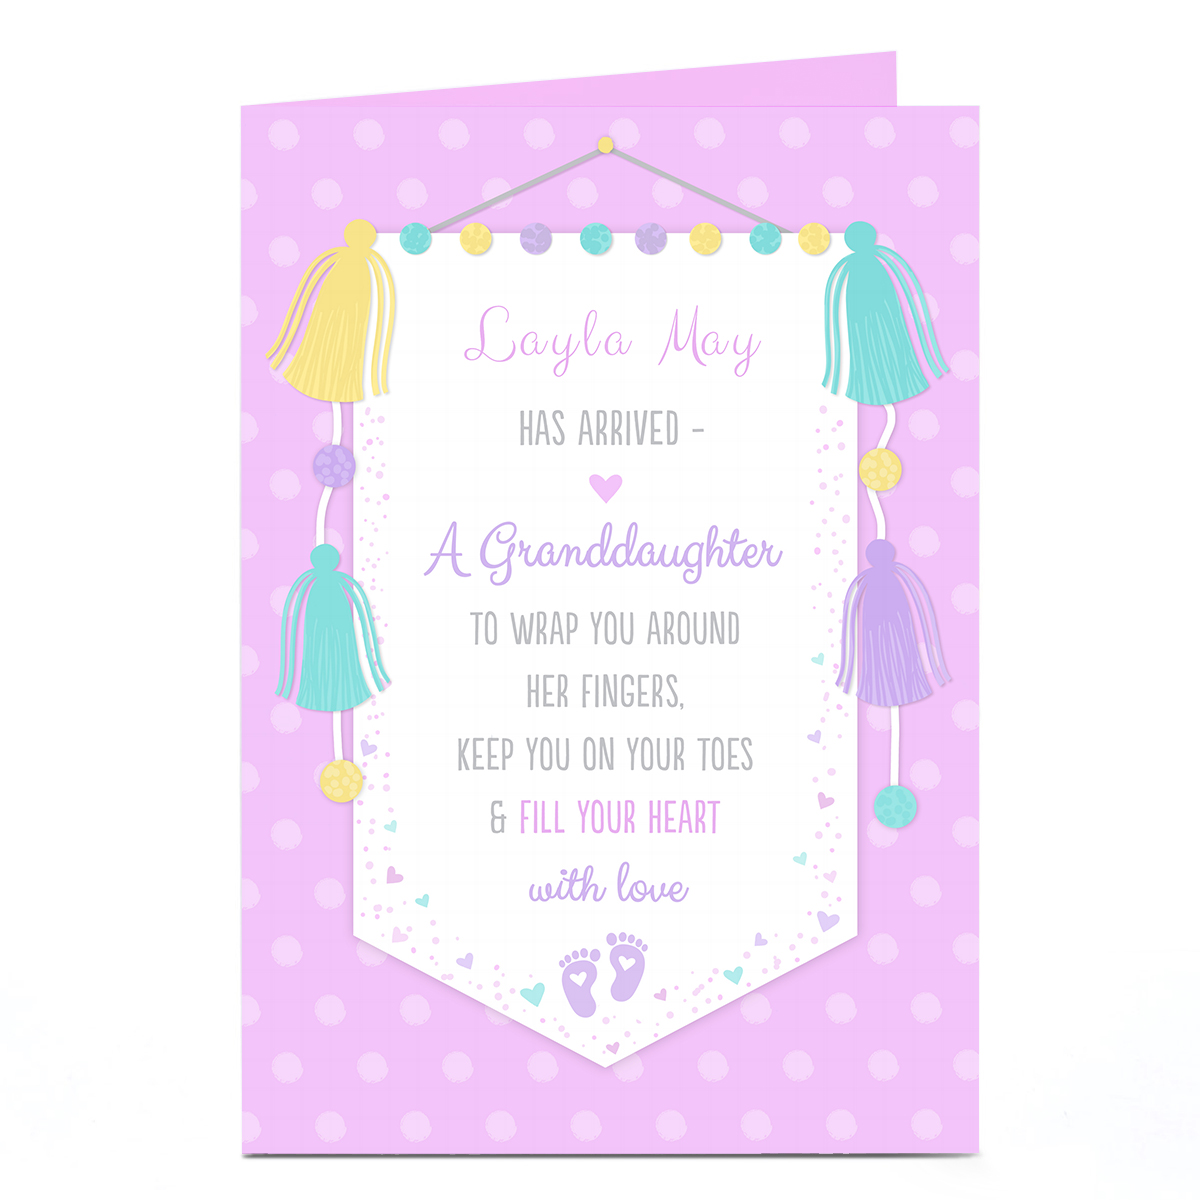 Personalised New Baby Card - A Granddaughter Has Arrived